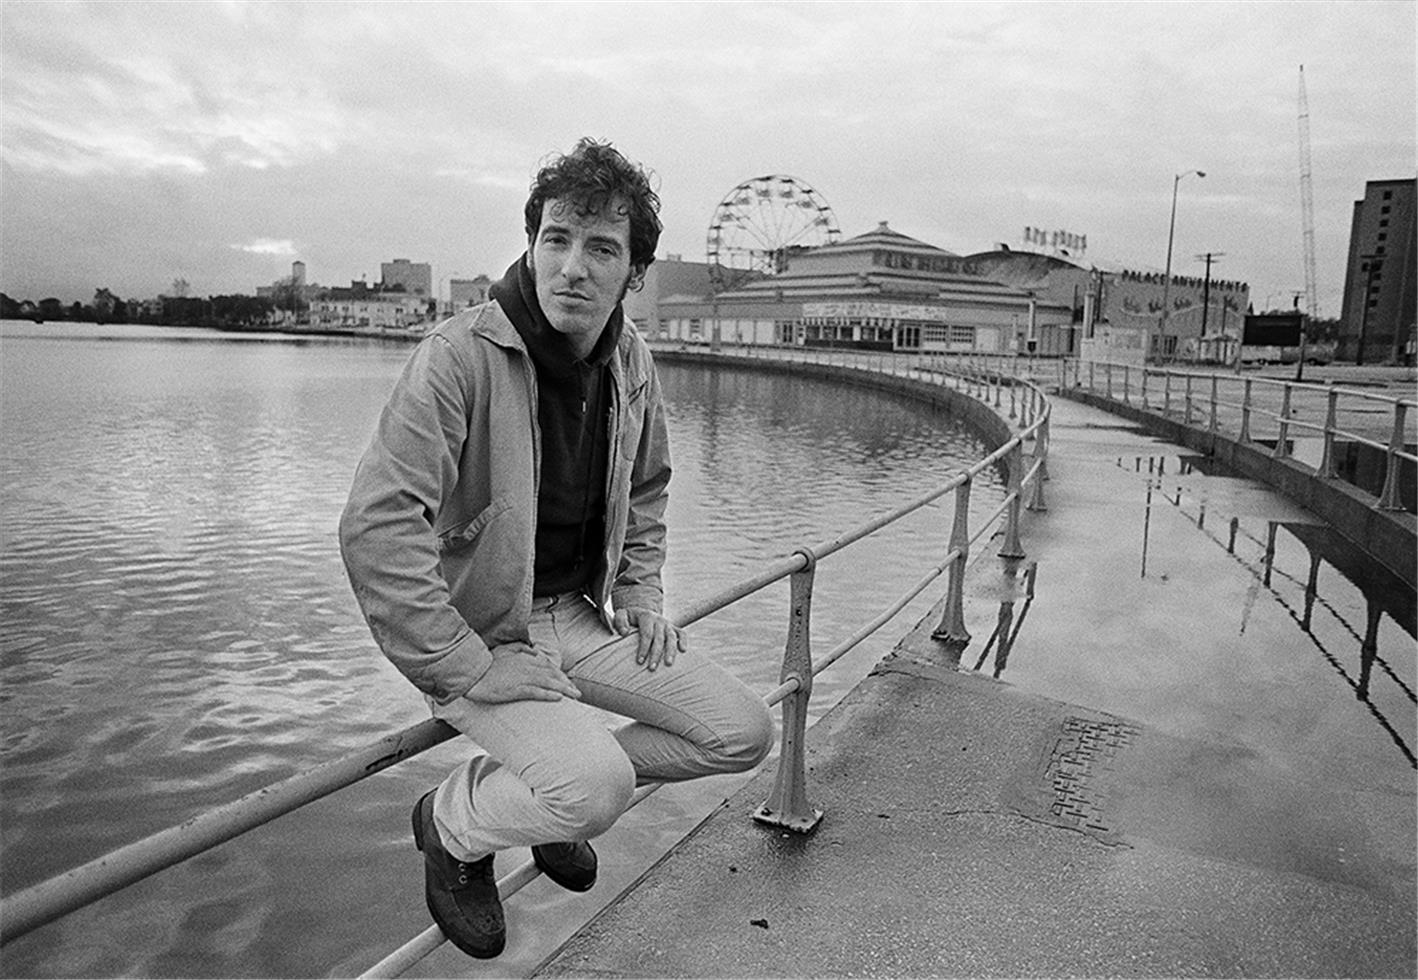 Joel Bernstein Black and White Photograph - Bruce Springsteen on fence